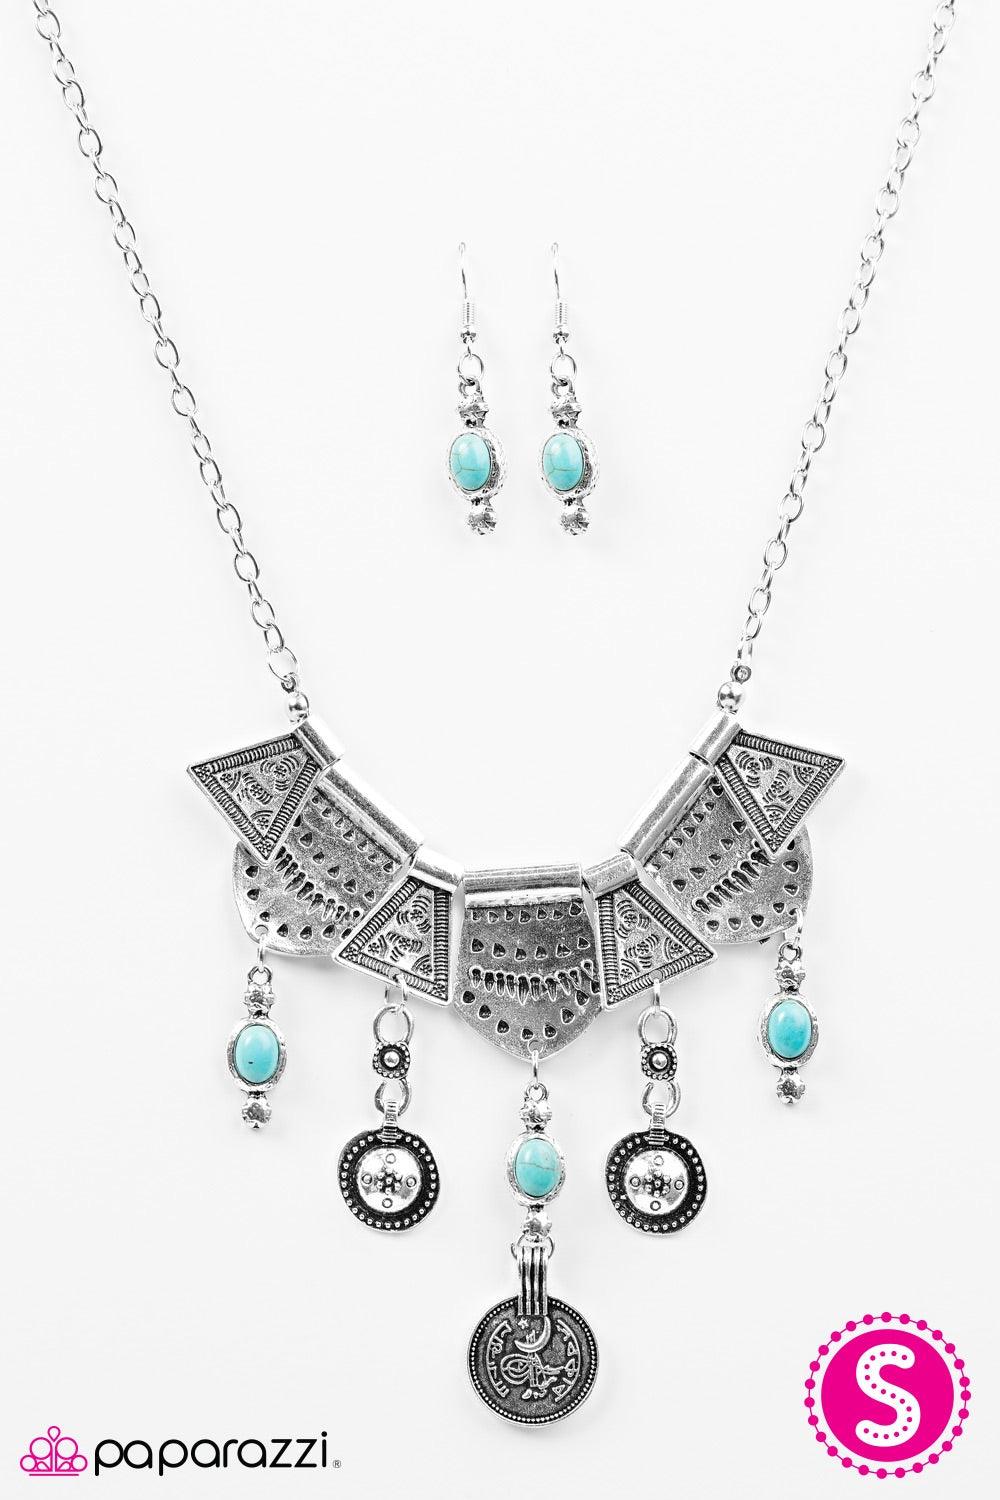 Paparazzi Accessories Paradise Princess - Blue Delicately hammered and etched with tribal patterns, shiny silver plates fan out below the collar in an indigenous fashion. Brushed in an antiqued shimmer, turquoise stone accents swing from the bottom of the